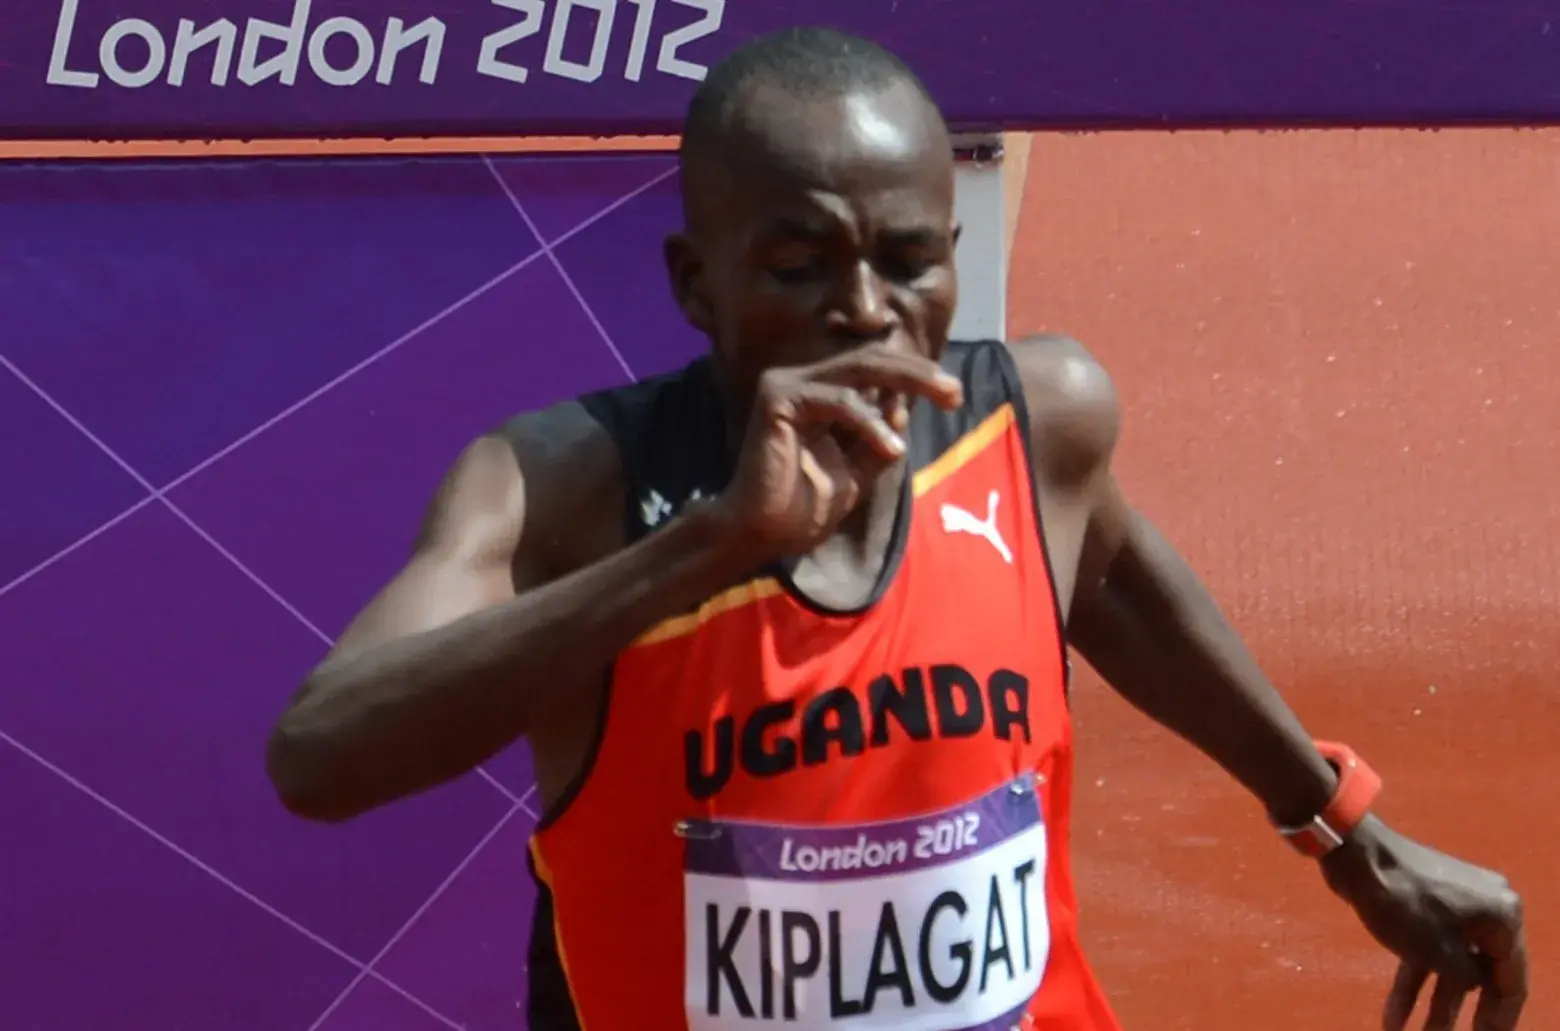 Ugandan athlete, Benjamin Kiplagat ‘murdered’ in Kenya, his lifeless body is found with a ‘knife wound to his neck’ in a car